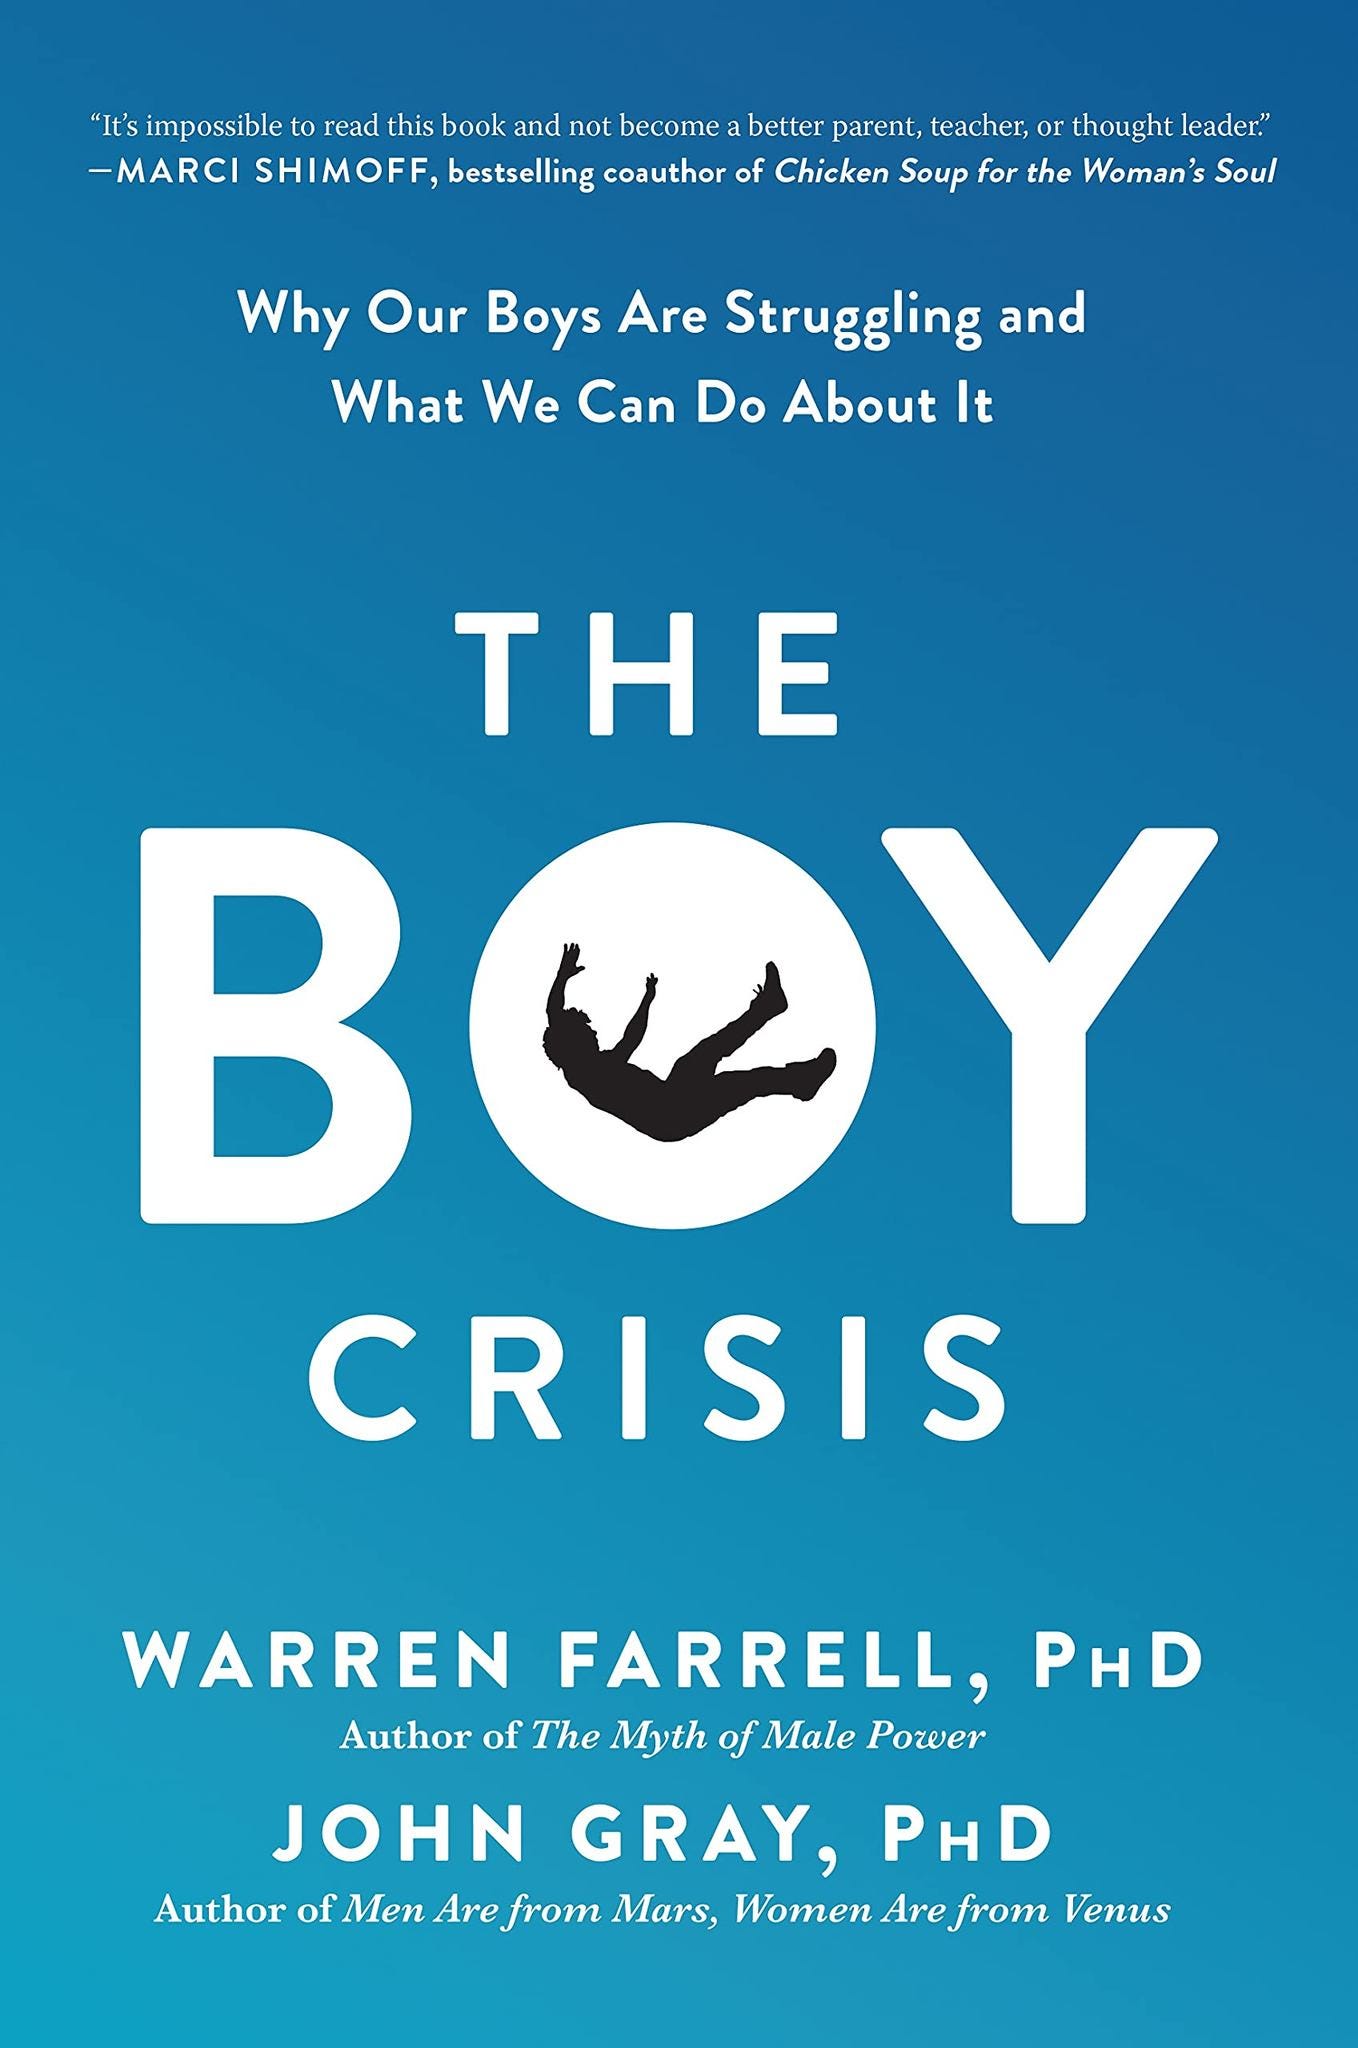 May be an image of text that says '"It's impossible to read this book and not become abetter parent, teacher, thought leader." -MARCI SHIMOFF, bestselling coauthor of Chicken Soup for the Woman's Soul Why Our Boys Are Struggling and What We Can Do About It THE BOY CRISIS WARREN FARRELL, PHD Author of The Myth Male Power JOHN GRAY, PHD Author of Men Are from Mars, Women Are from Venus'